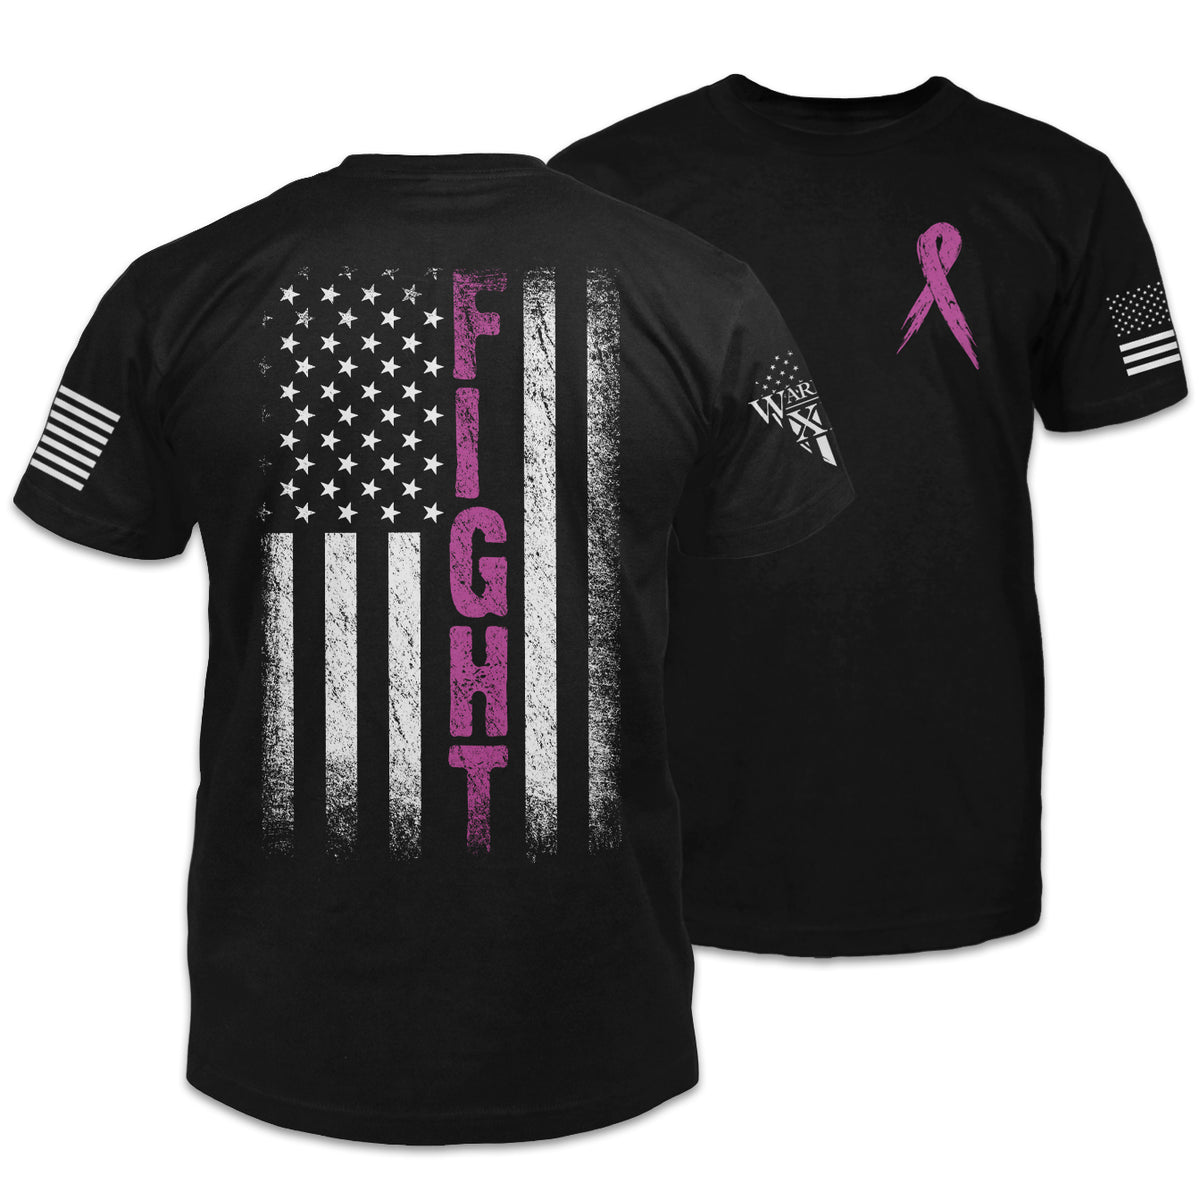 Front & back black t-shirt with the words "Fight" within an American flag printed on the back of the shirt for breast cancer awareness.